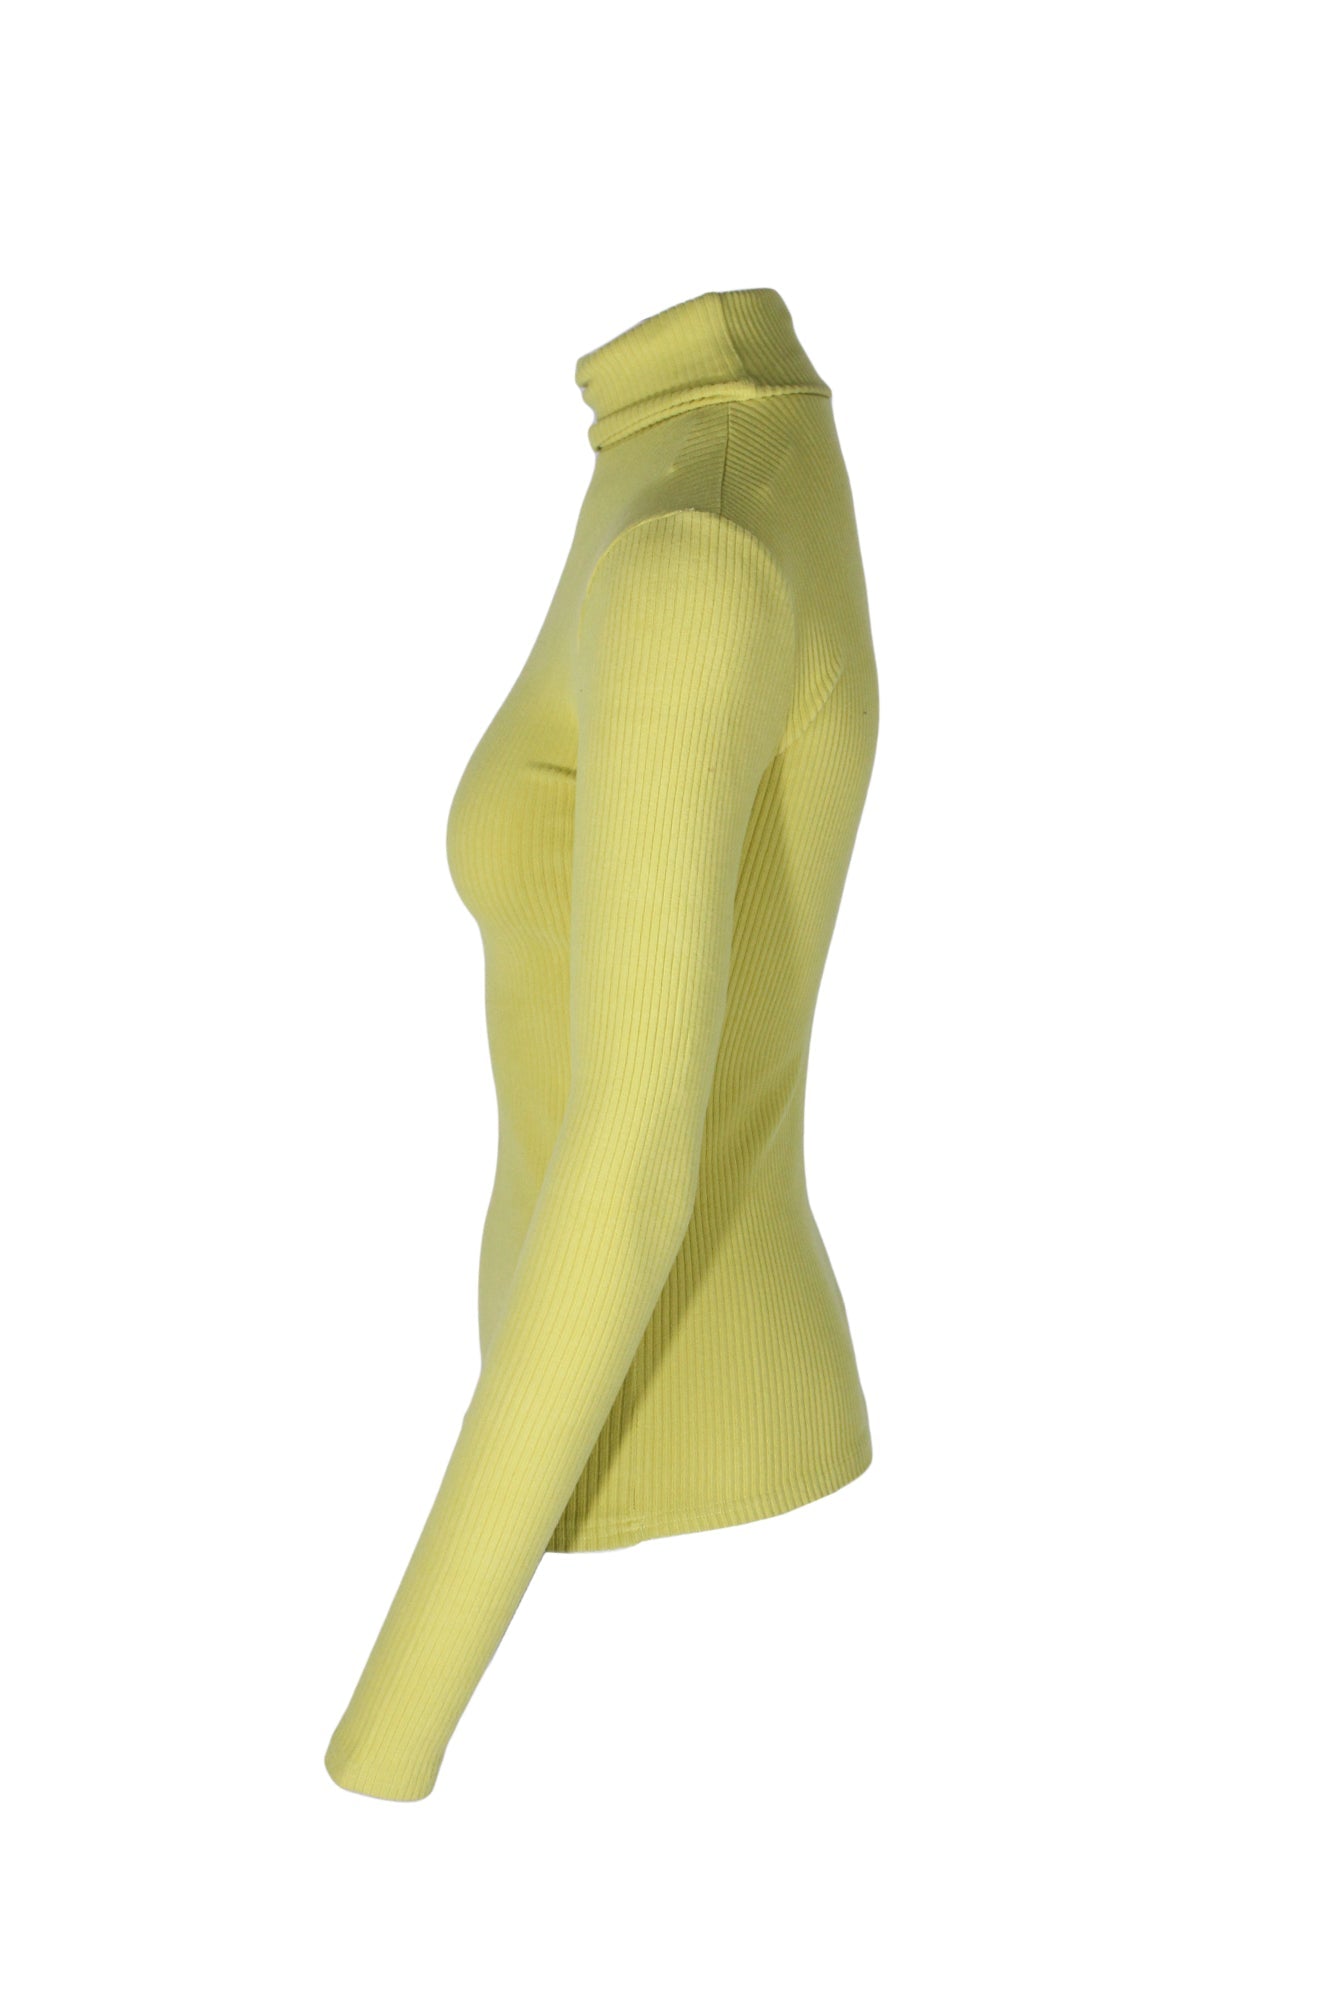 side angle unlabeled chartreuse rib knit top on feminine mannequin torso.